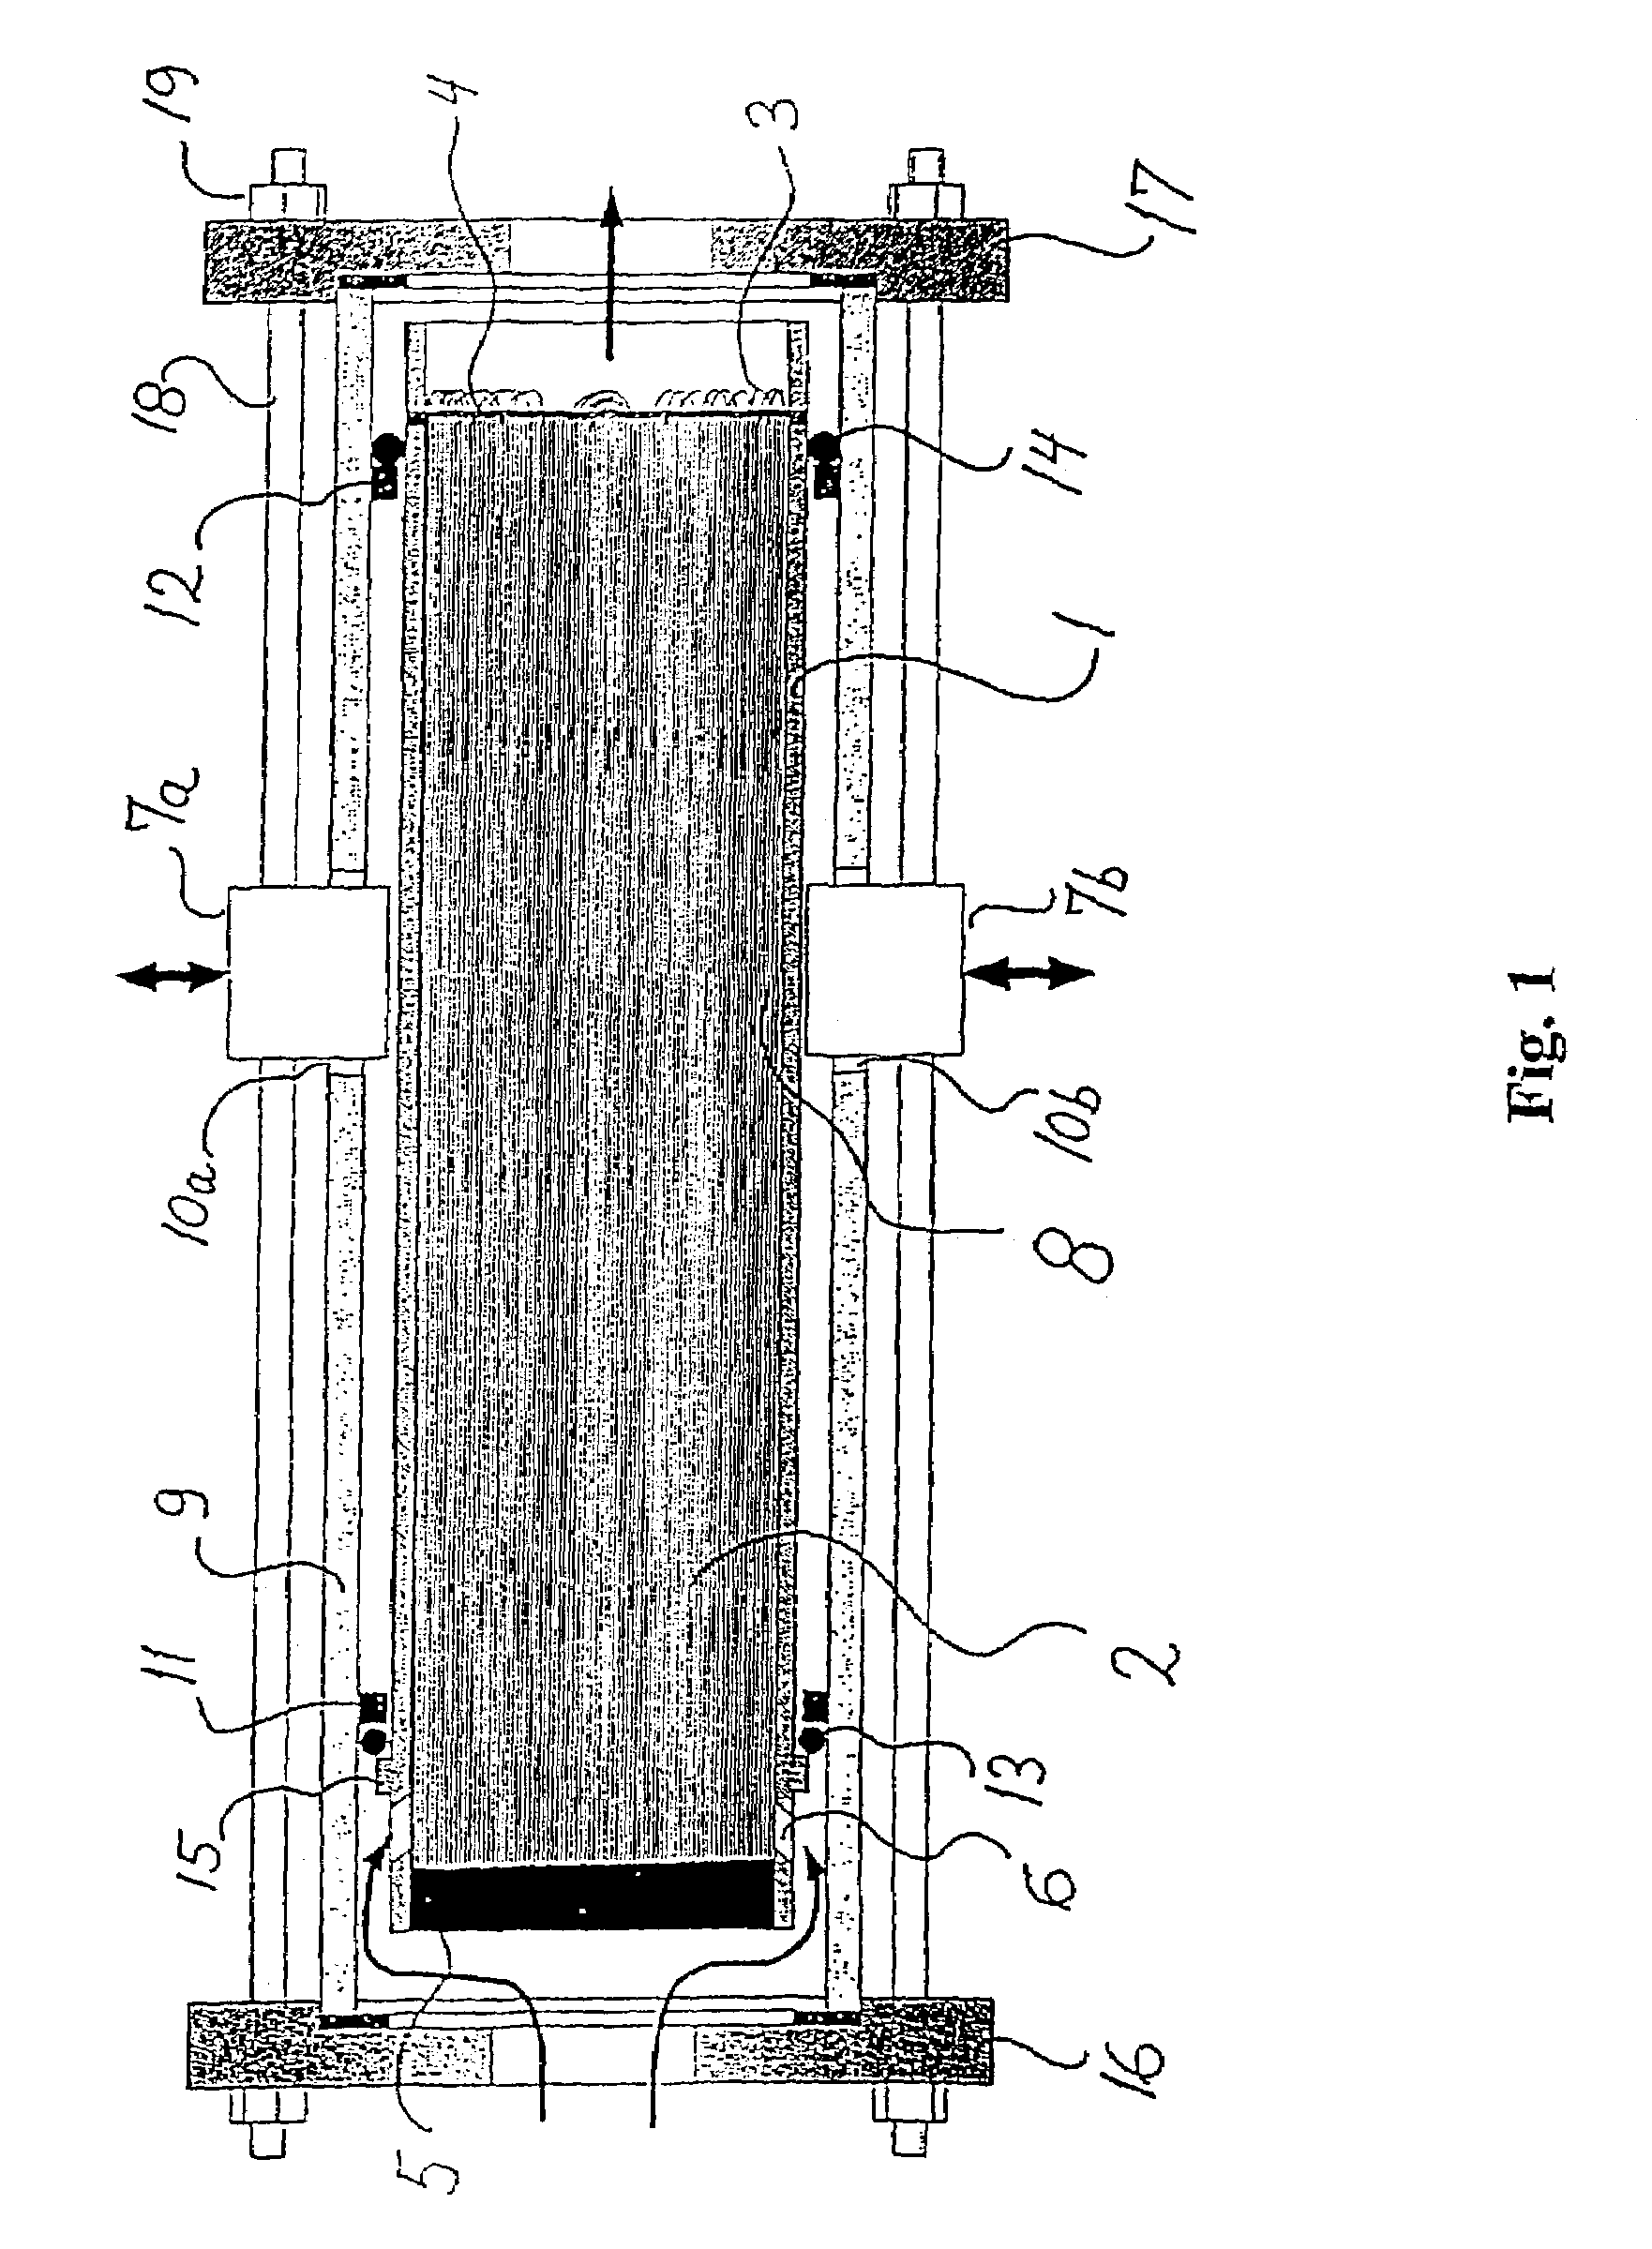 Device and a method for filtering a fluid